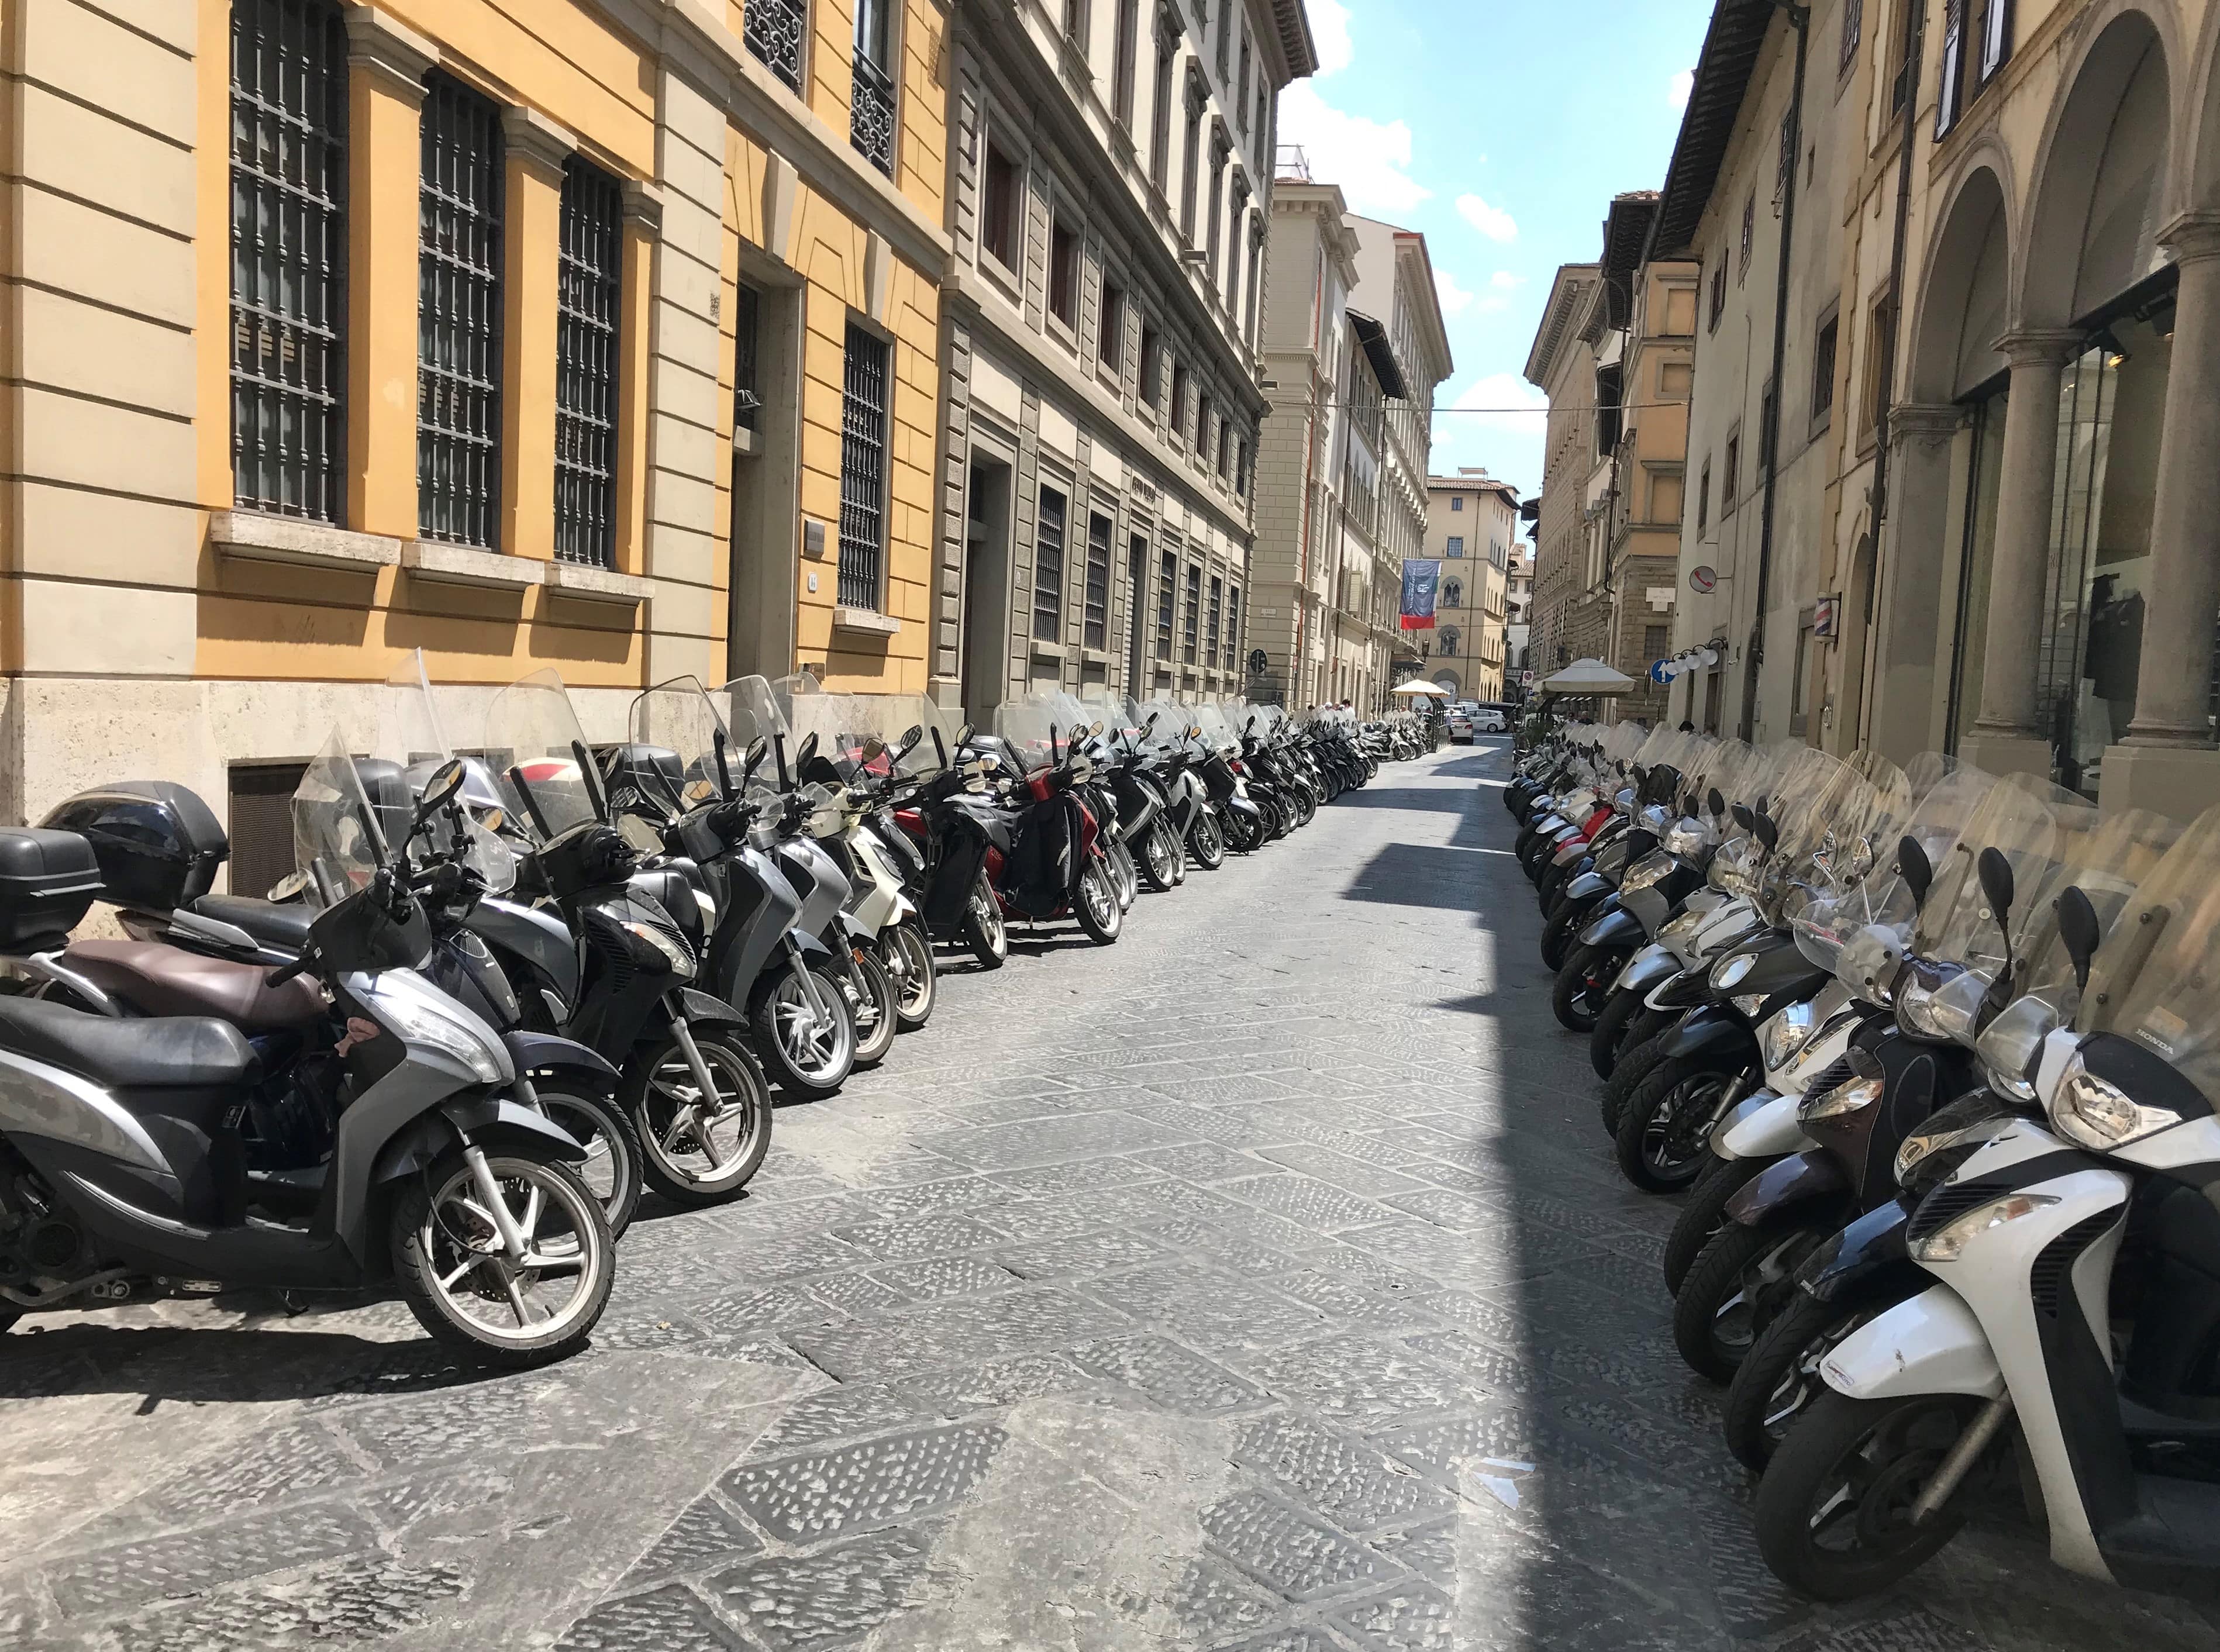 My Dealings with Museum Security in Florence